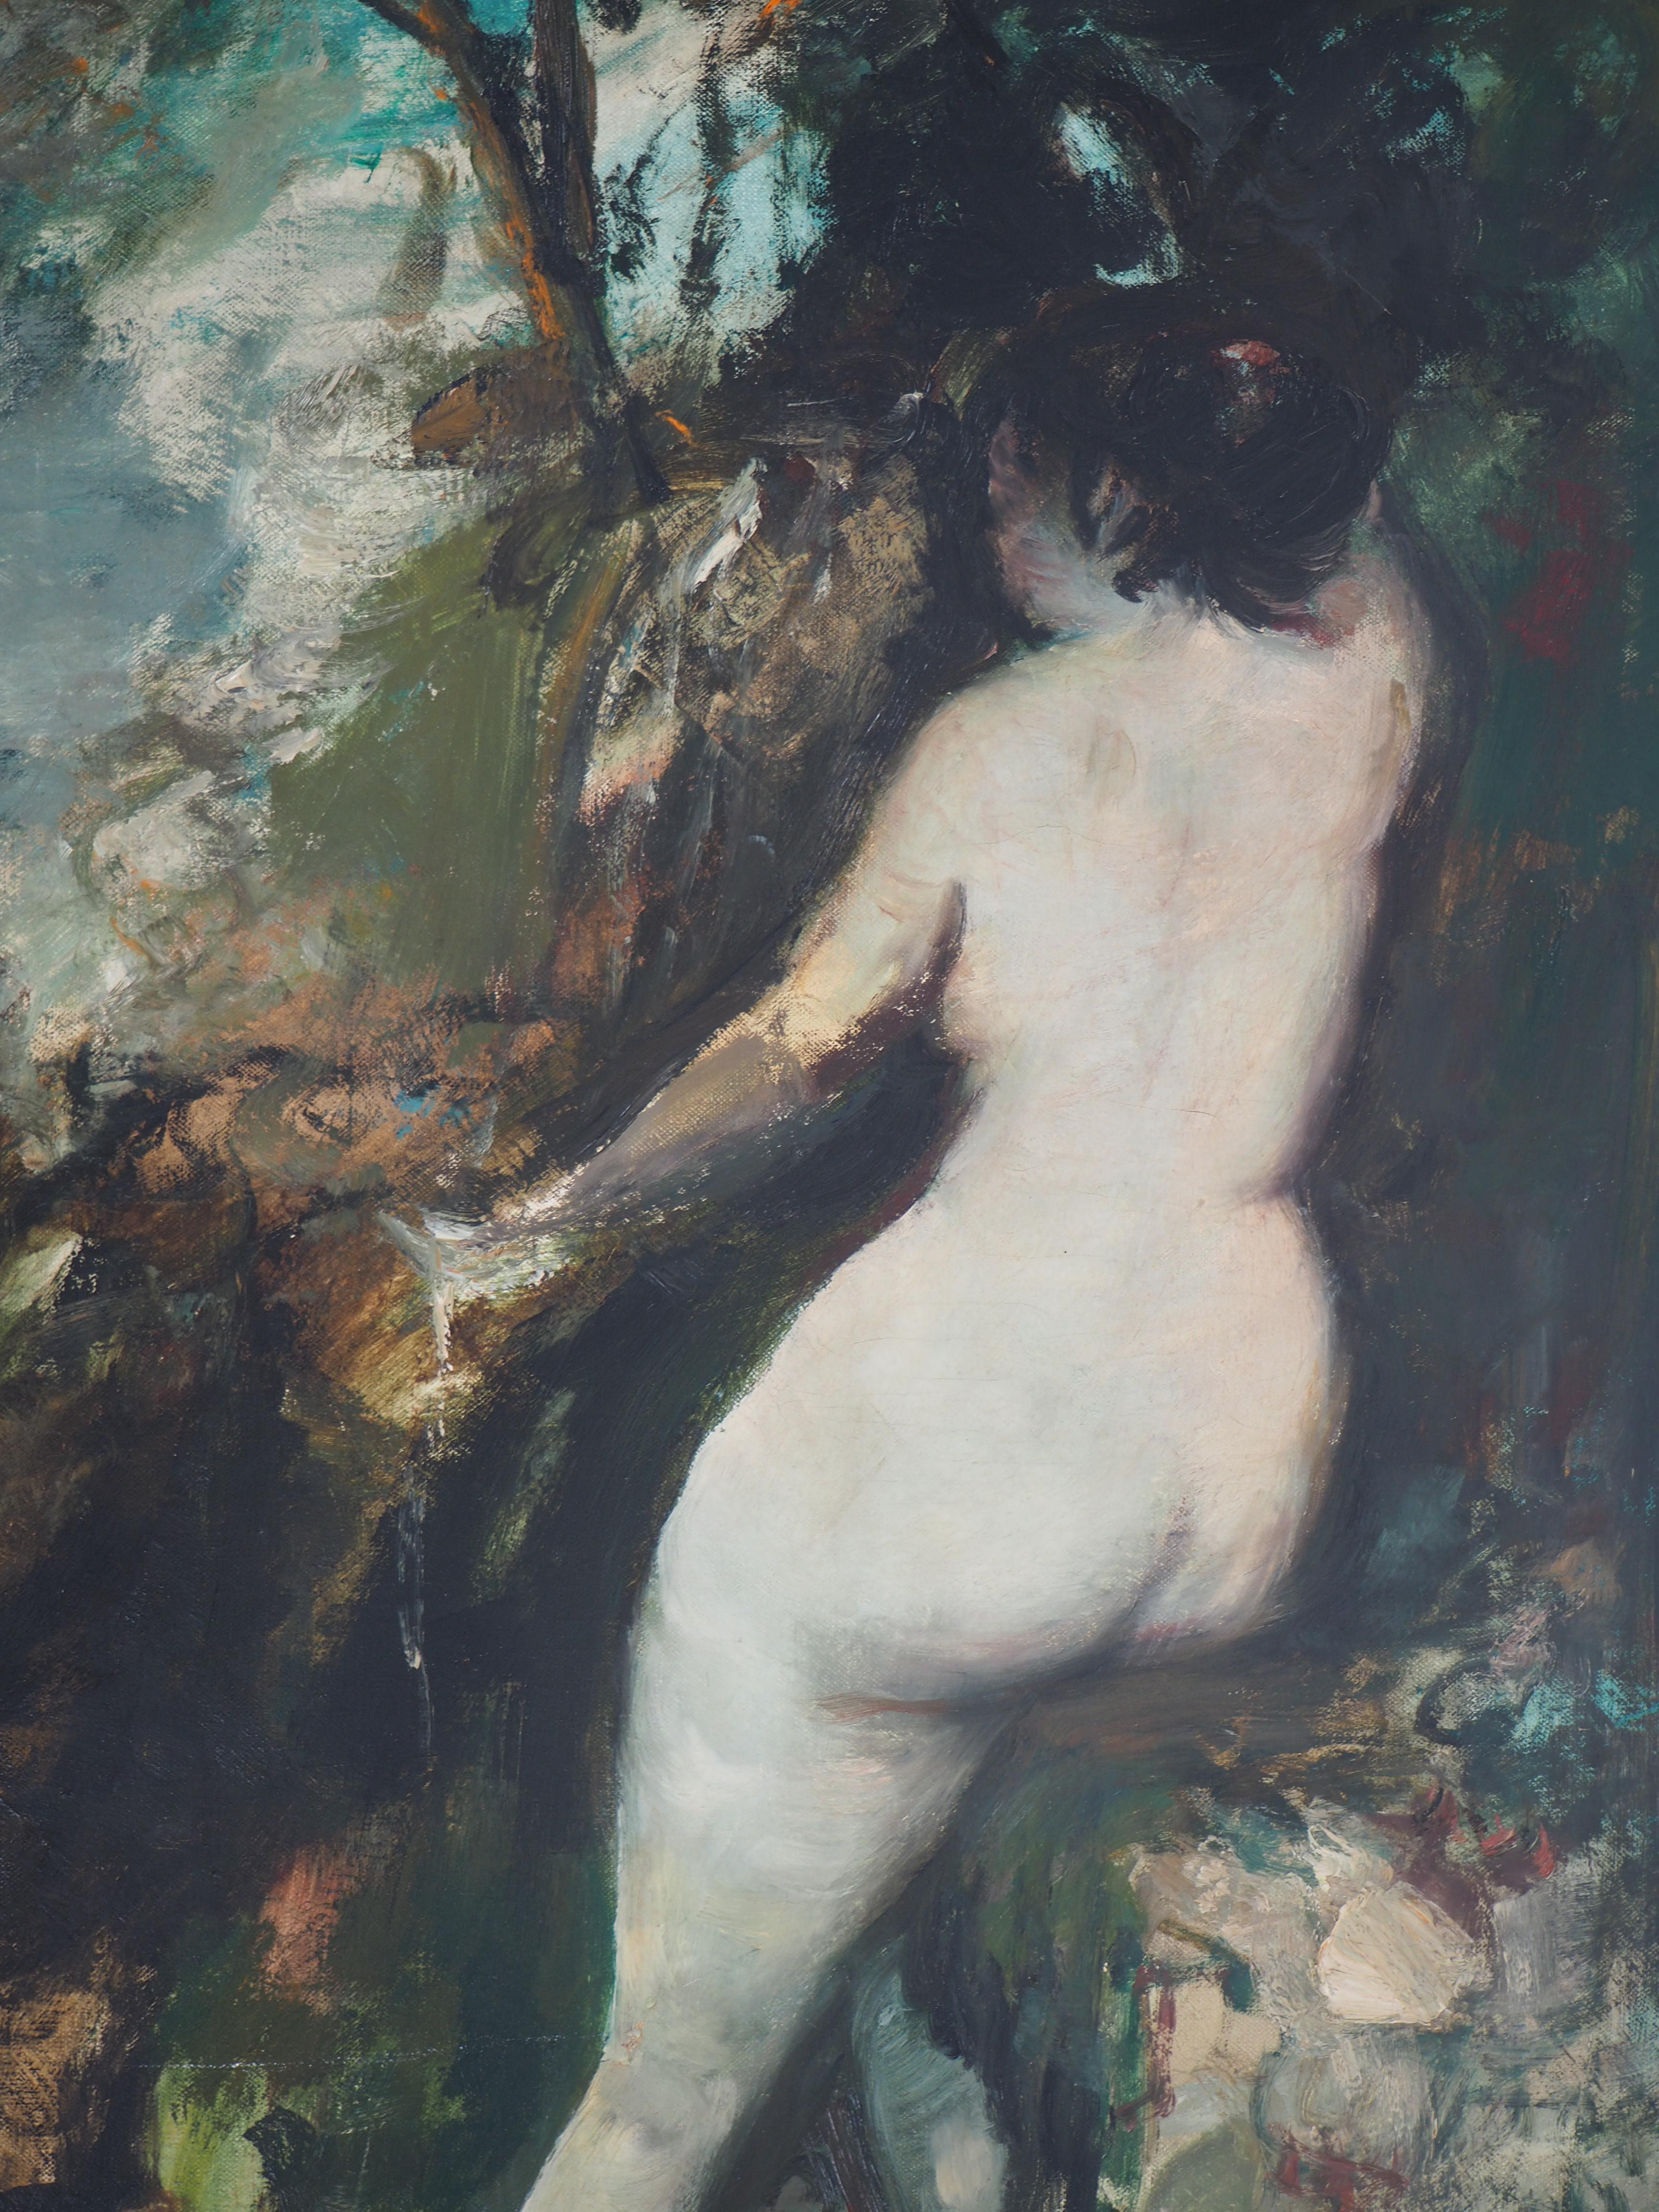 Nude near the Source (Study after Courbet)  - Original Oil on canvas, Signed - Expressionist Painting by François Heaulmé